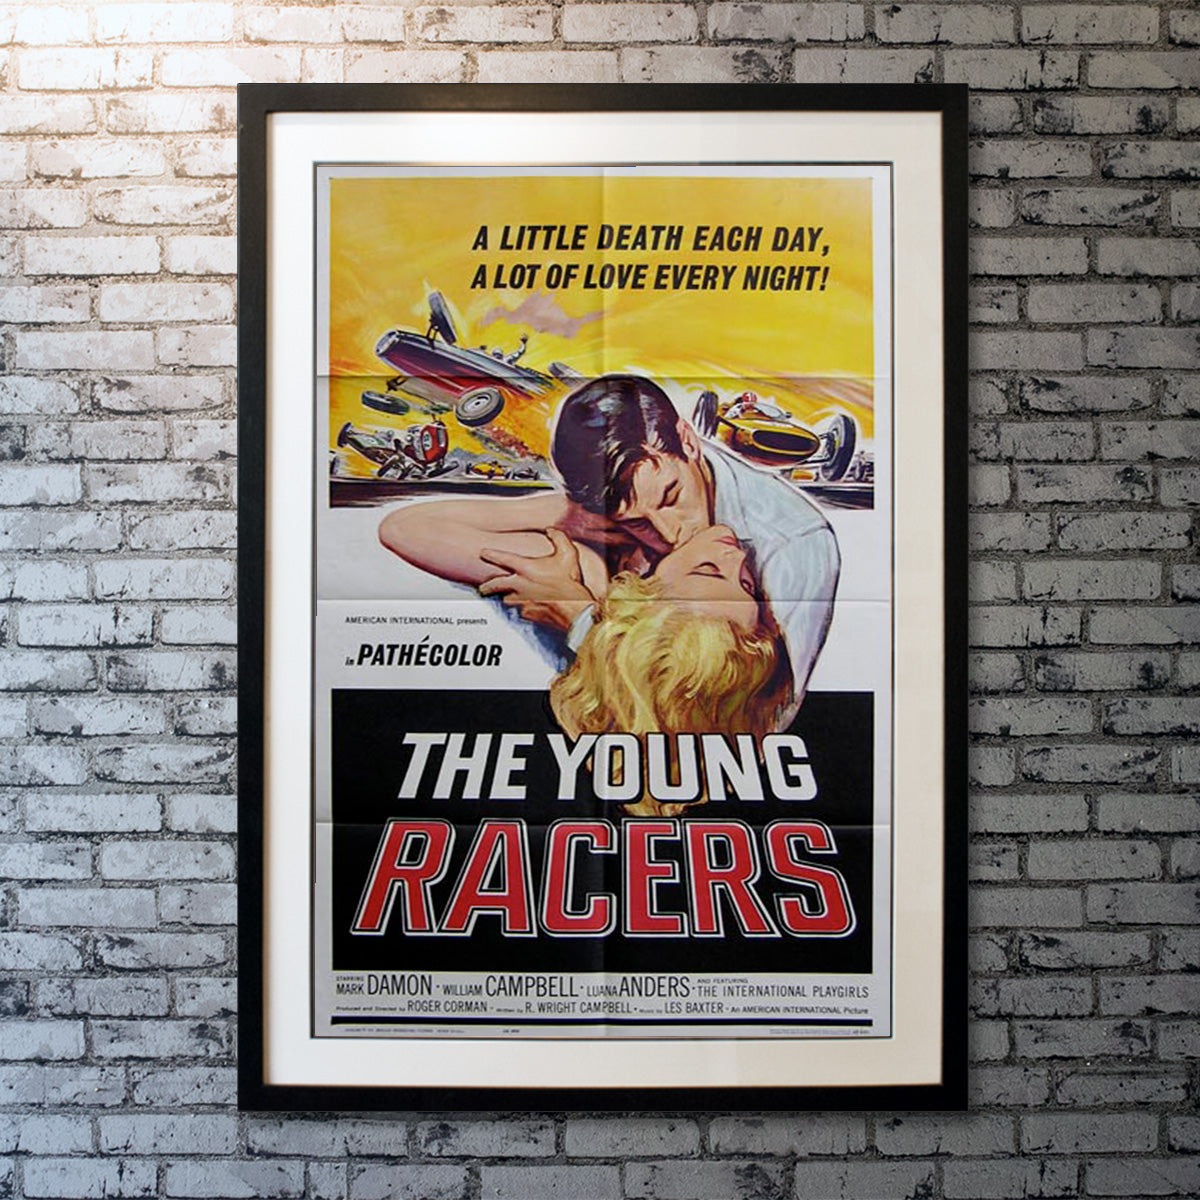 Young Racers, The (1963)